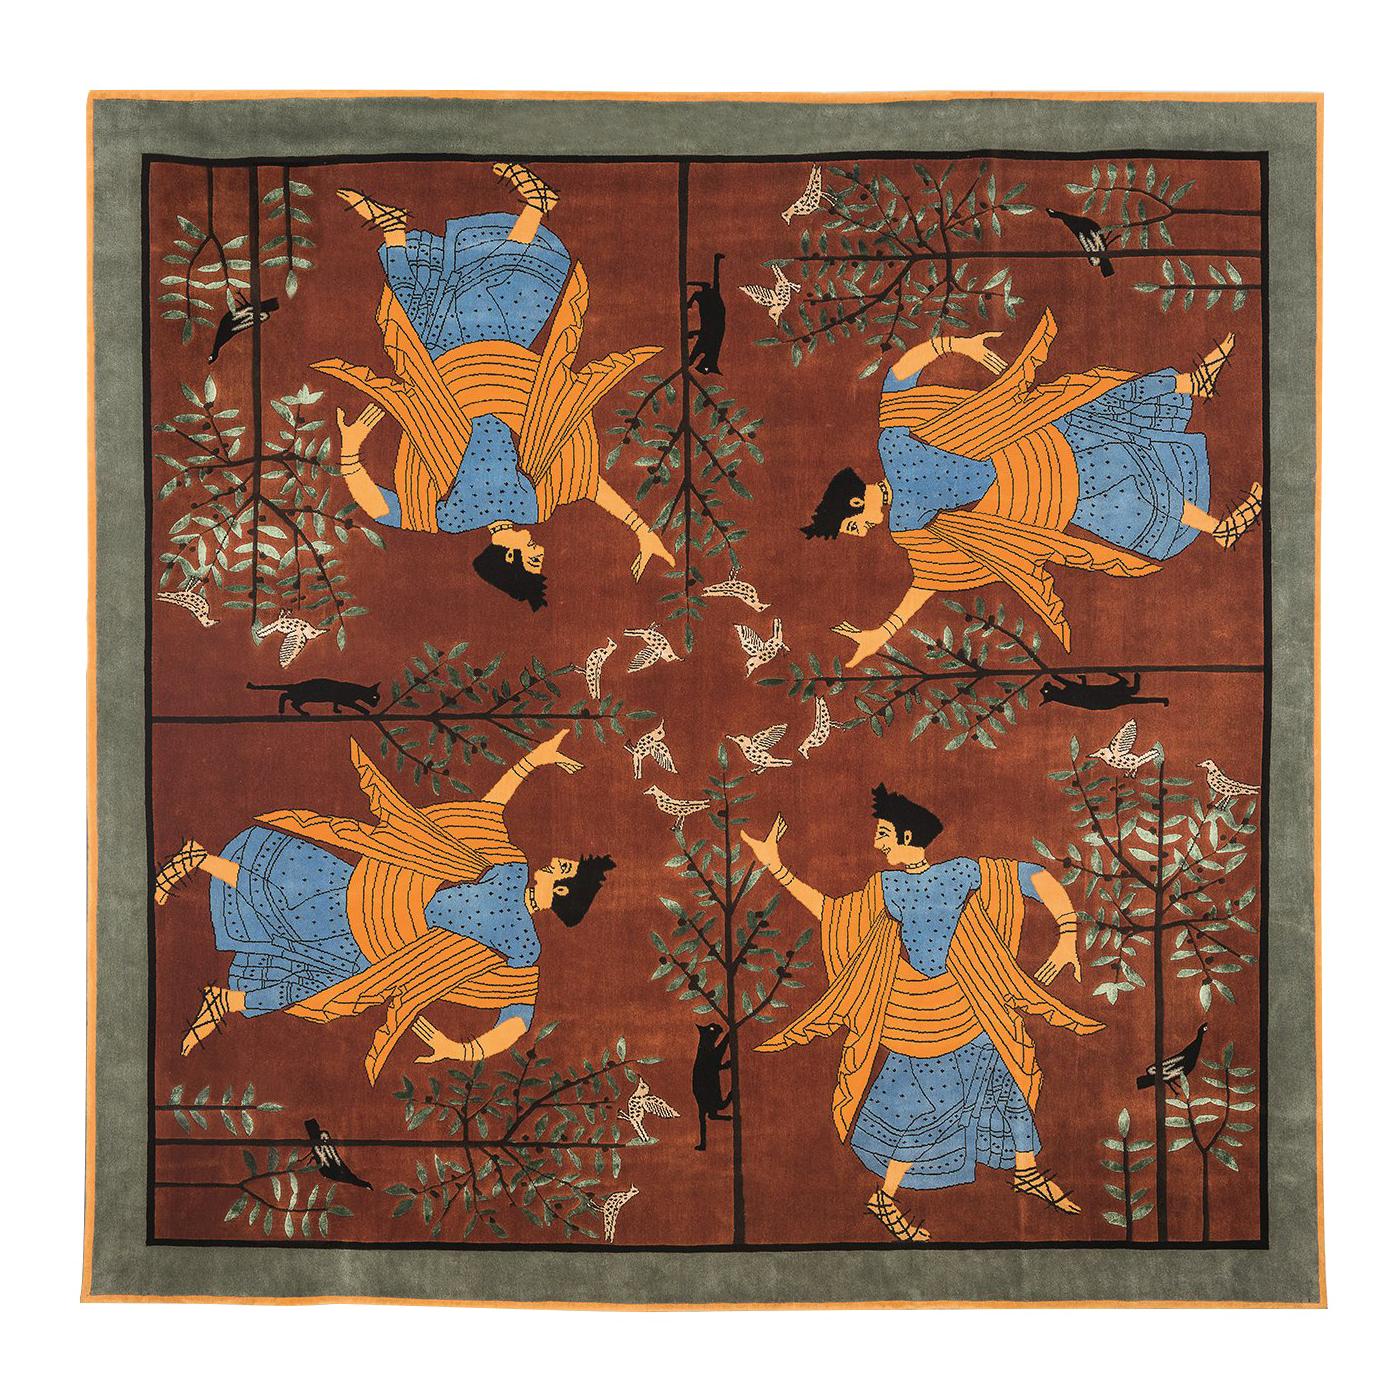 Boralevi Firenze Central Asian Rugs